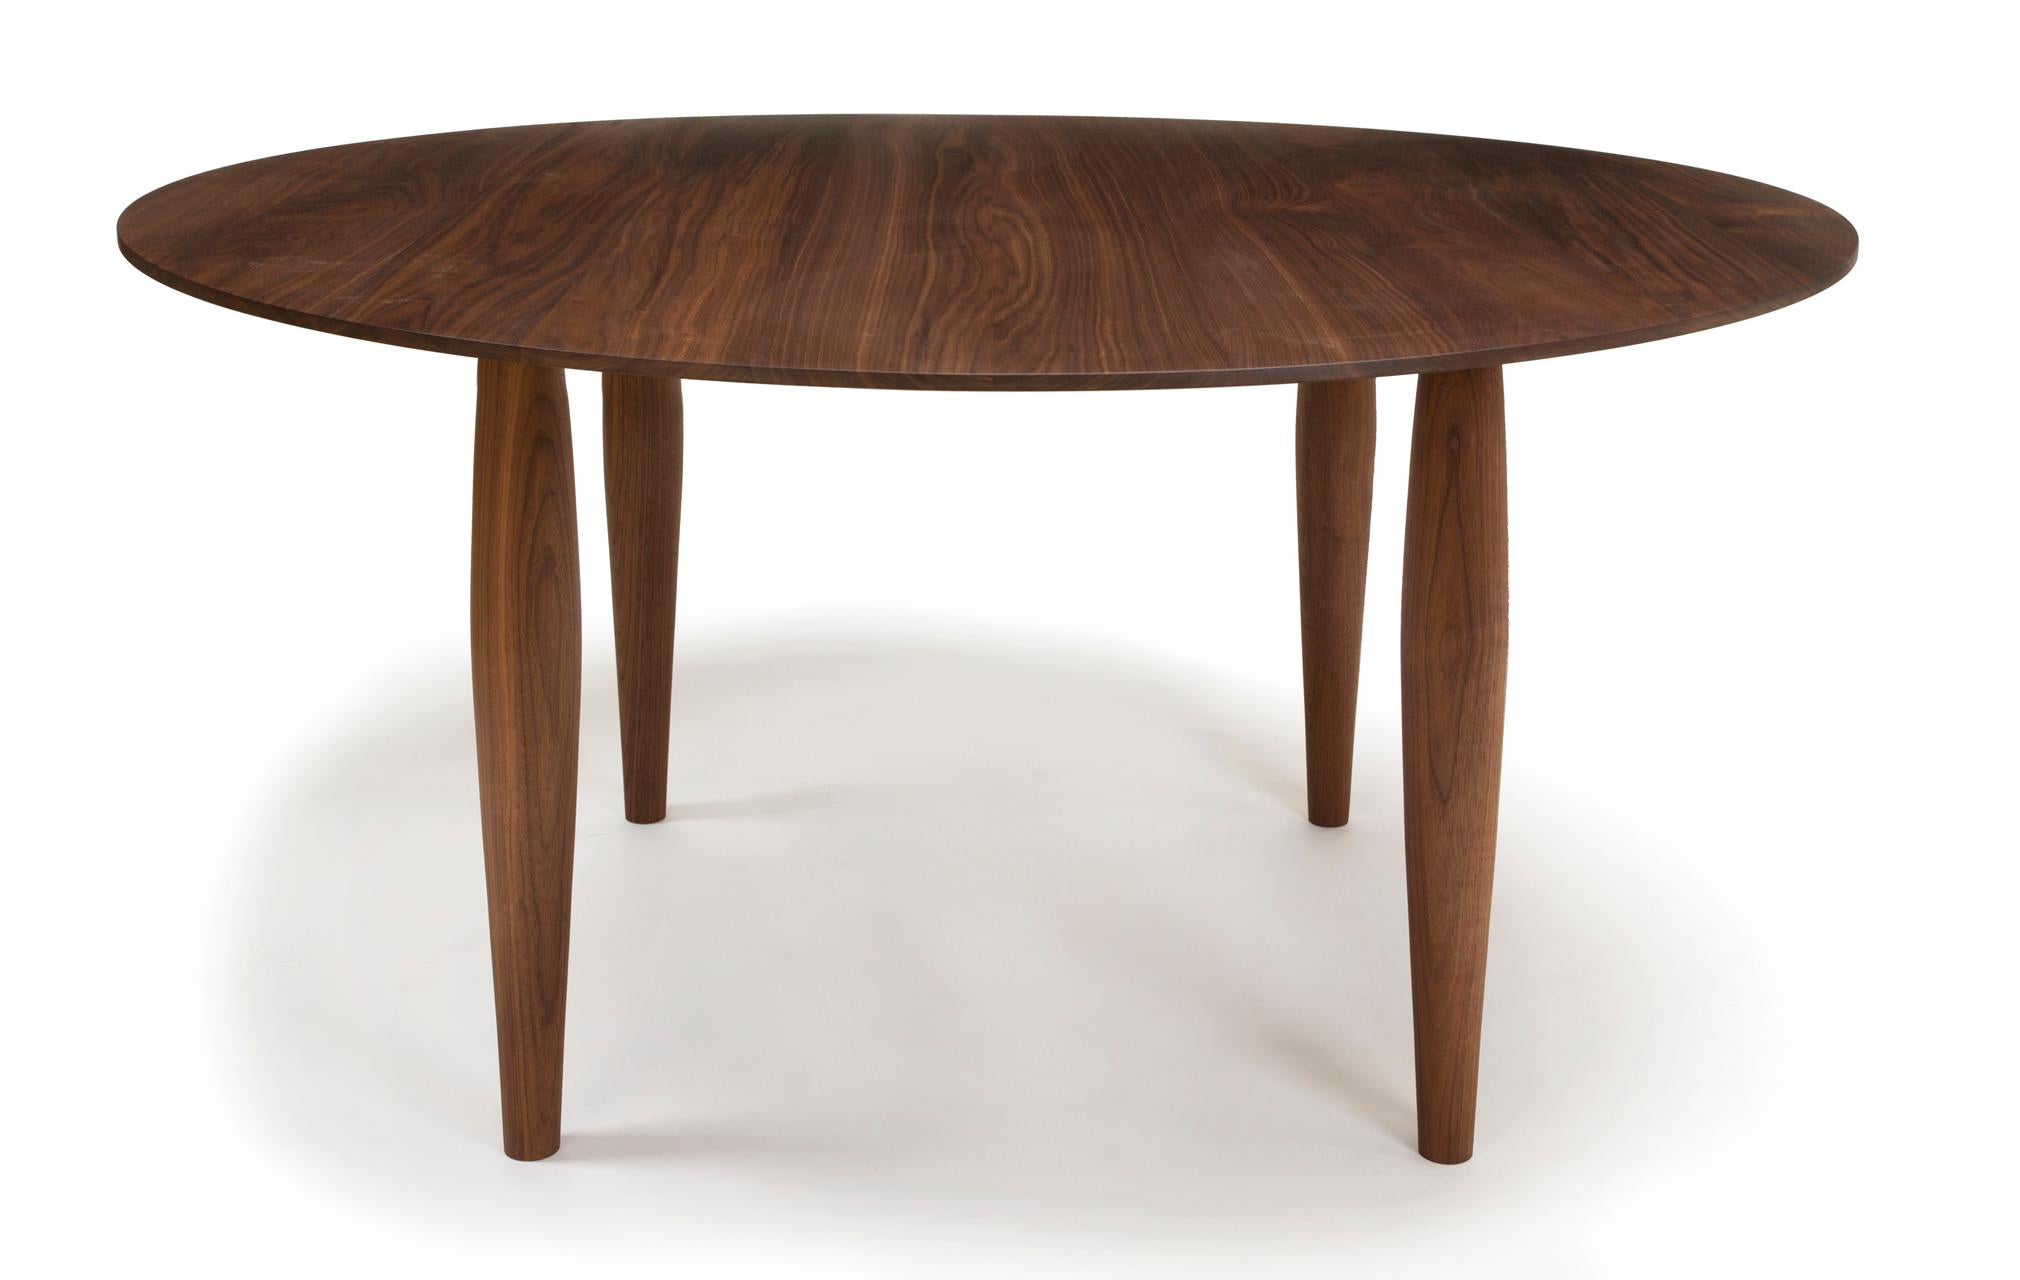 This new dining room or conference room table is the first circular table in the Studio DiPaolo collection, and it is called the 